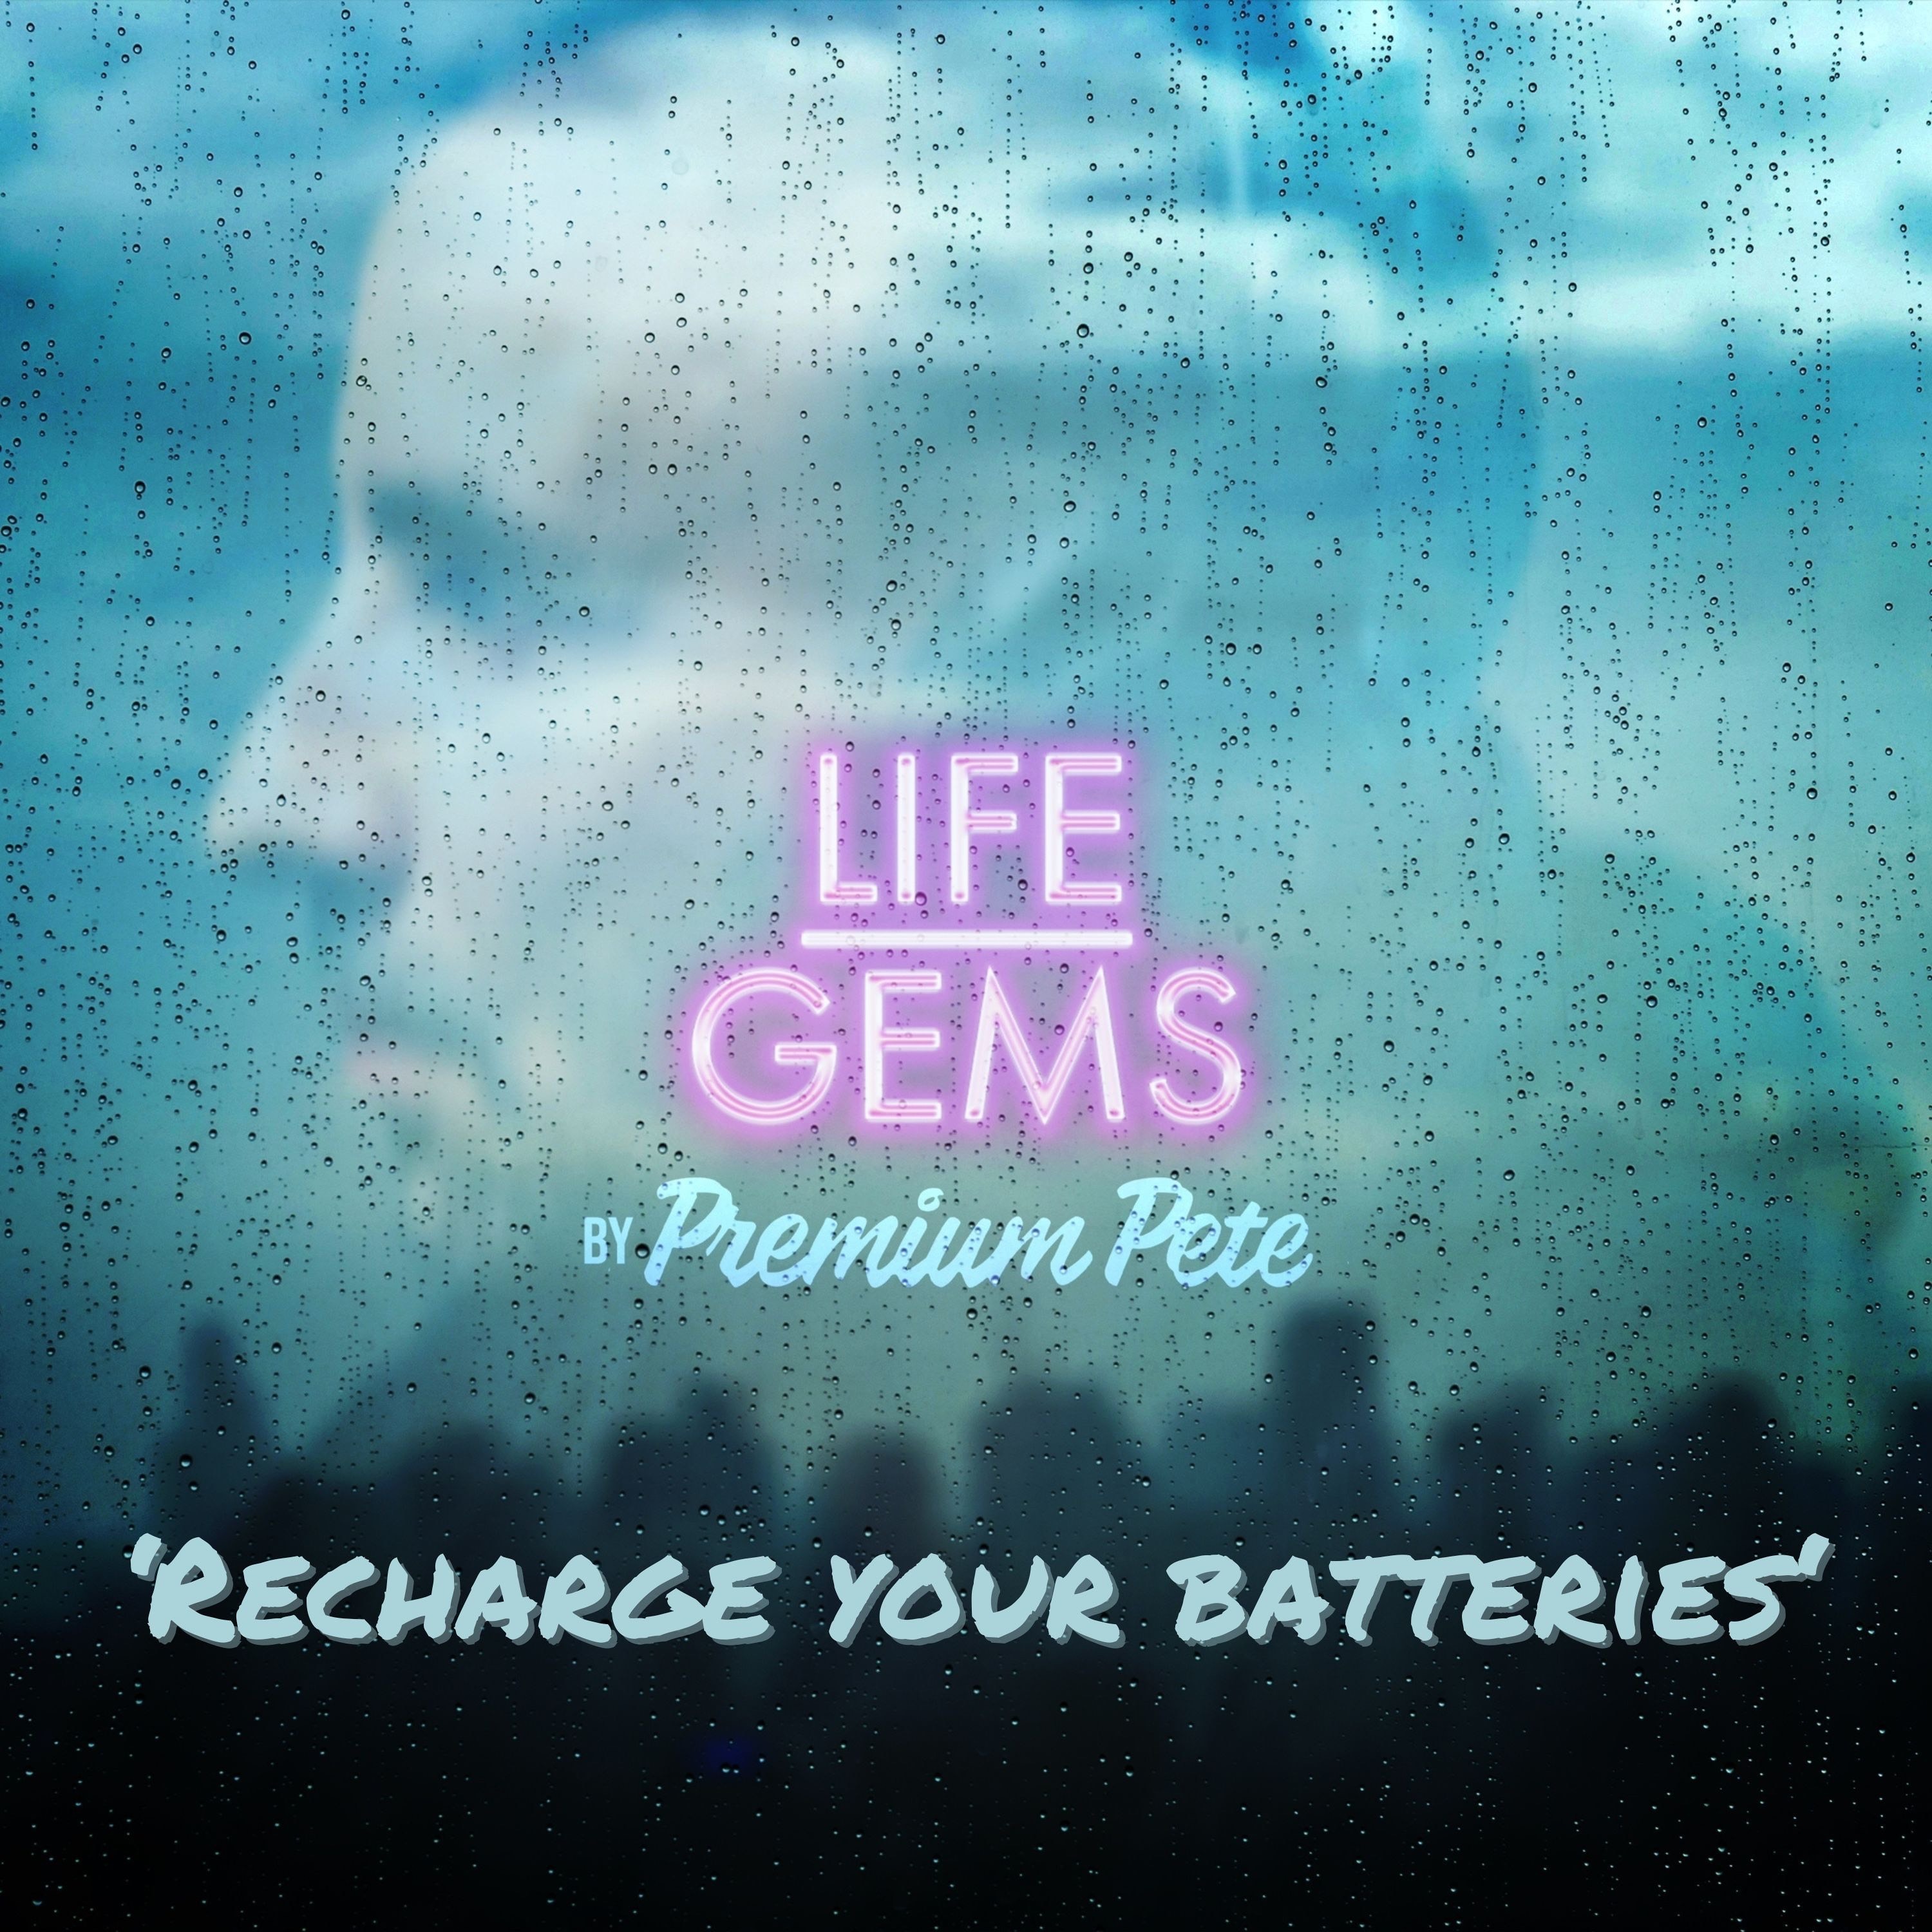 Life Gems ”Recharge Your Batteries”